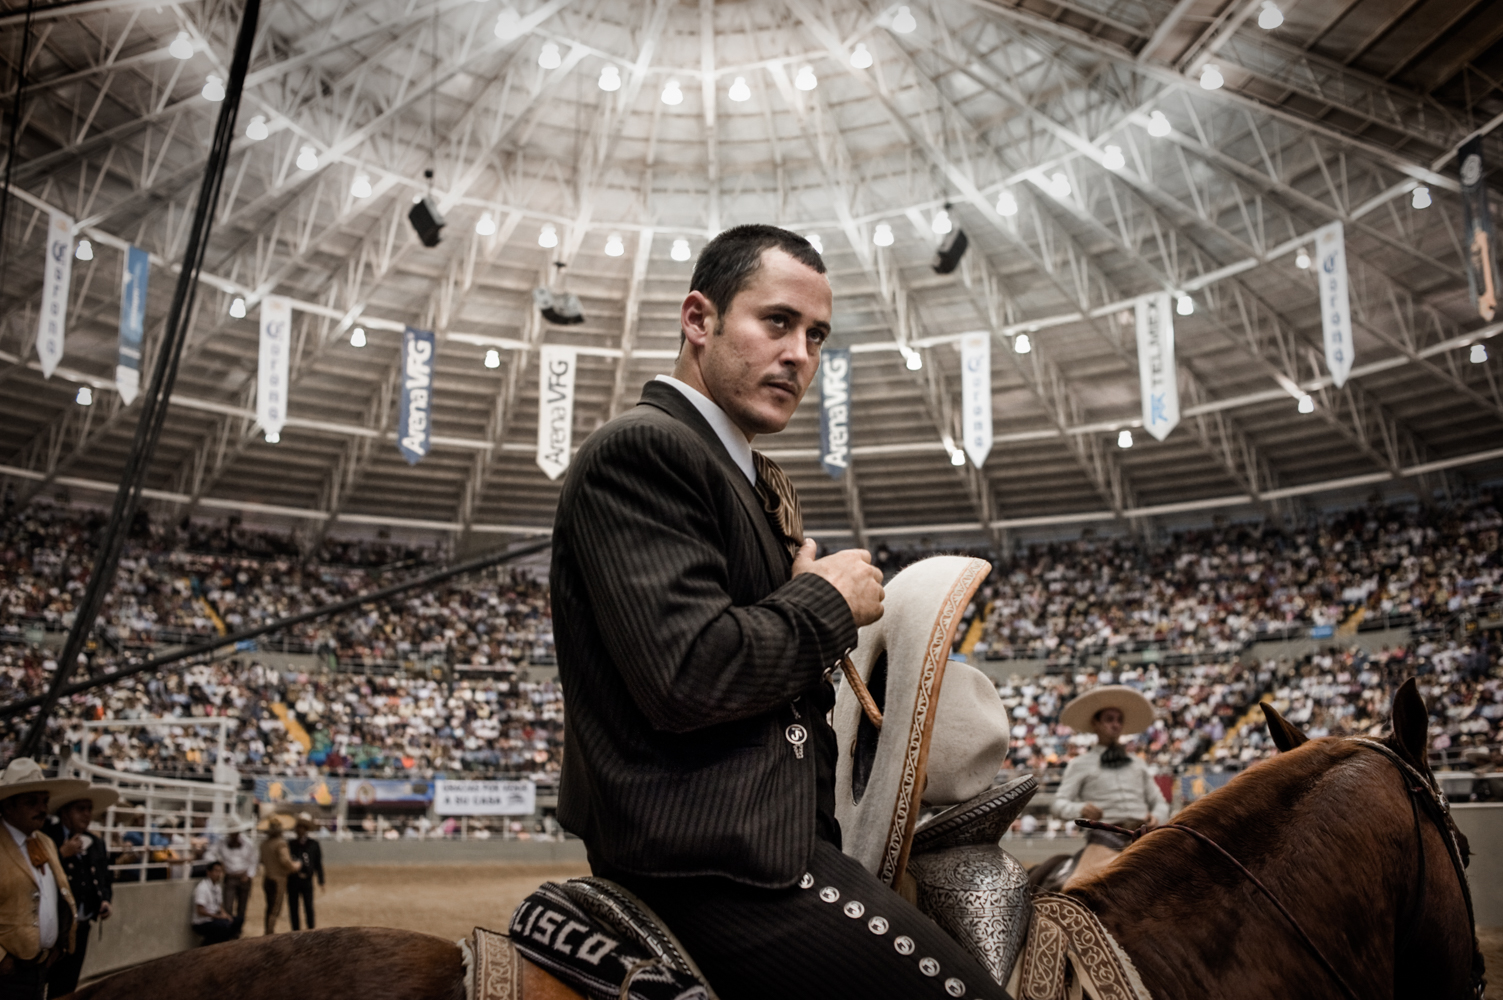 A Charro about to enter the arena to compete